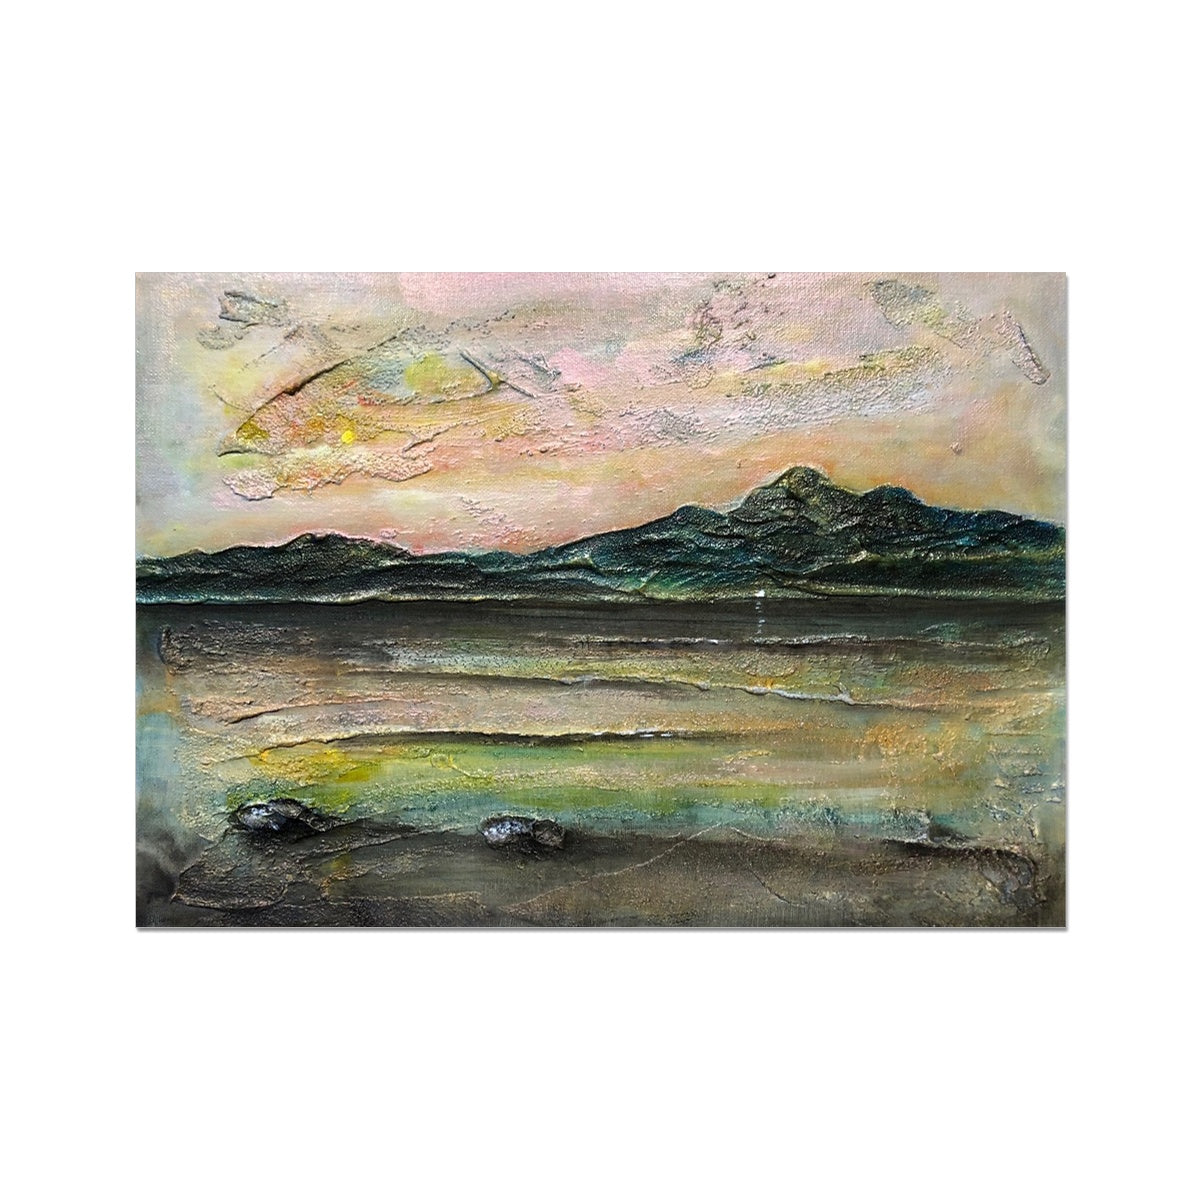 An Ethereal Loch Na Dal Skye Painting | Fine Art Prints From Scotland-Fine art-Scottish Lochs & Mountains Art Gallery-A2 Landscape-Paintings, Prints, Homeware, Art Gifts From Scotland By Scottish Artist Kevin Hunter